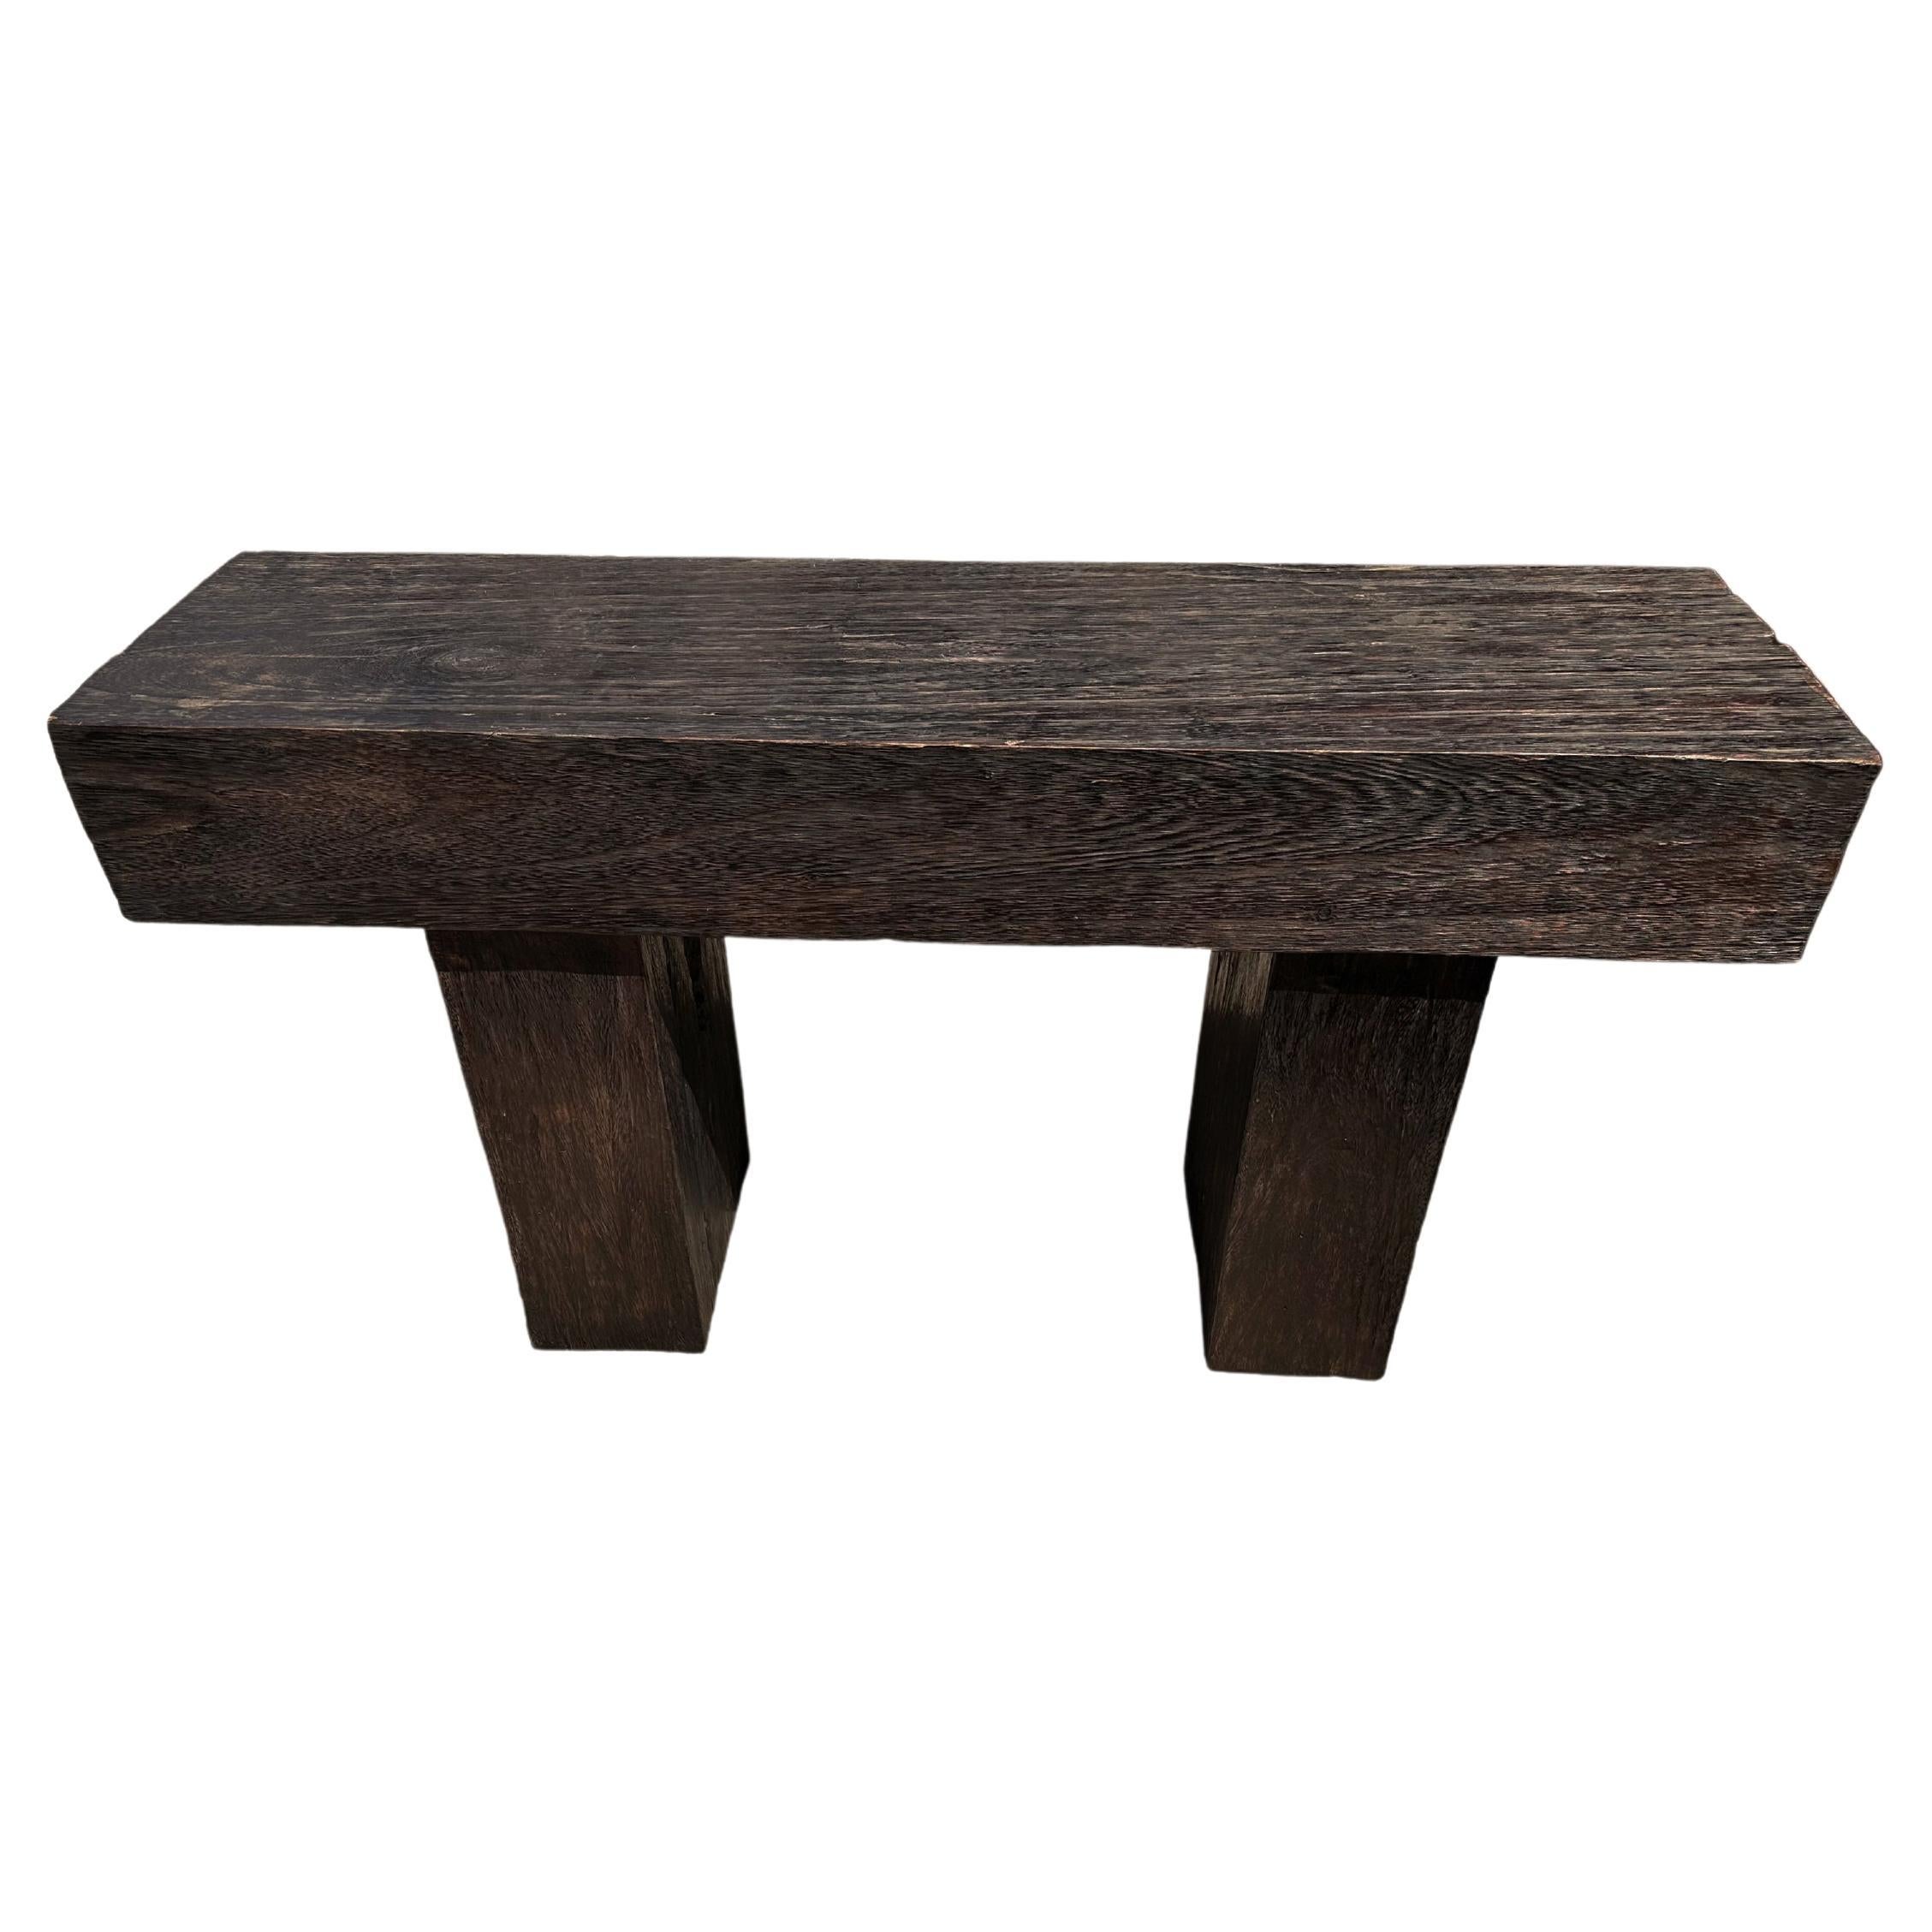 Solid Mango Wood Console Table, Burnt Finish Modern Organic For Sale